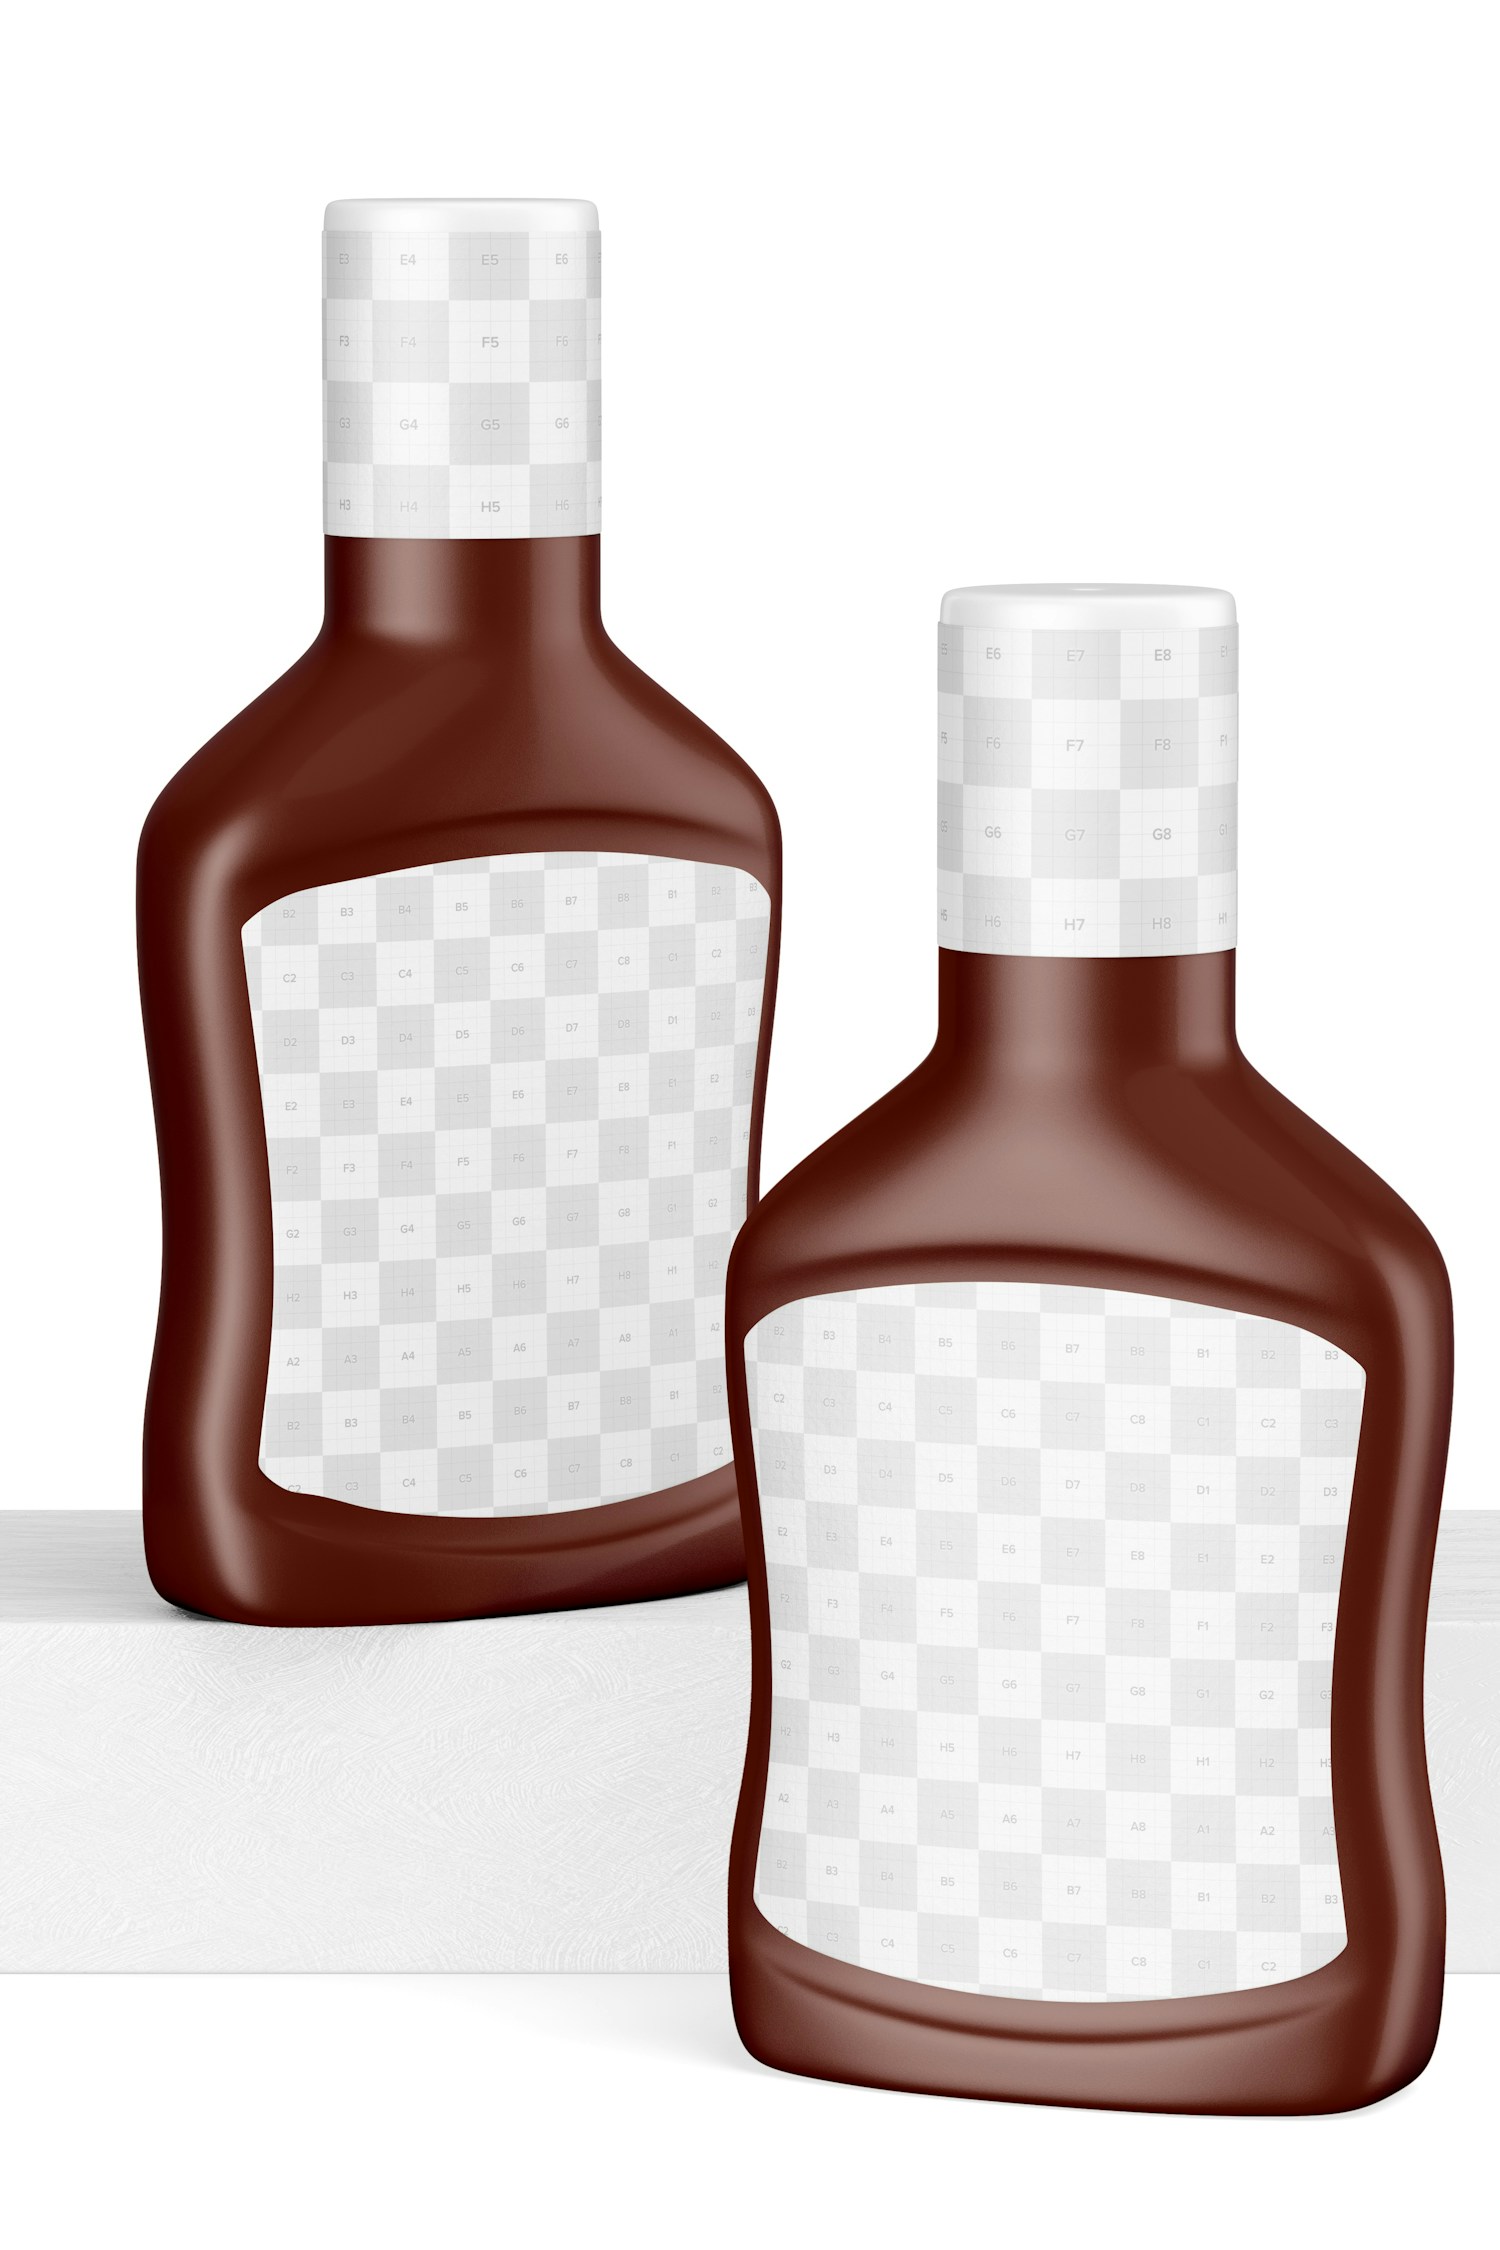 Barbecue Sauce Bottles Mockup, Front View